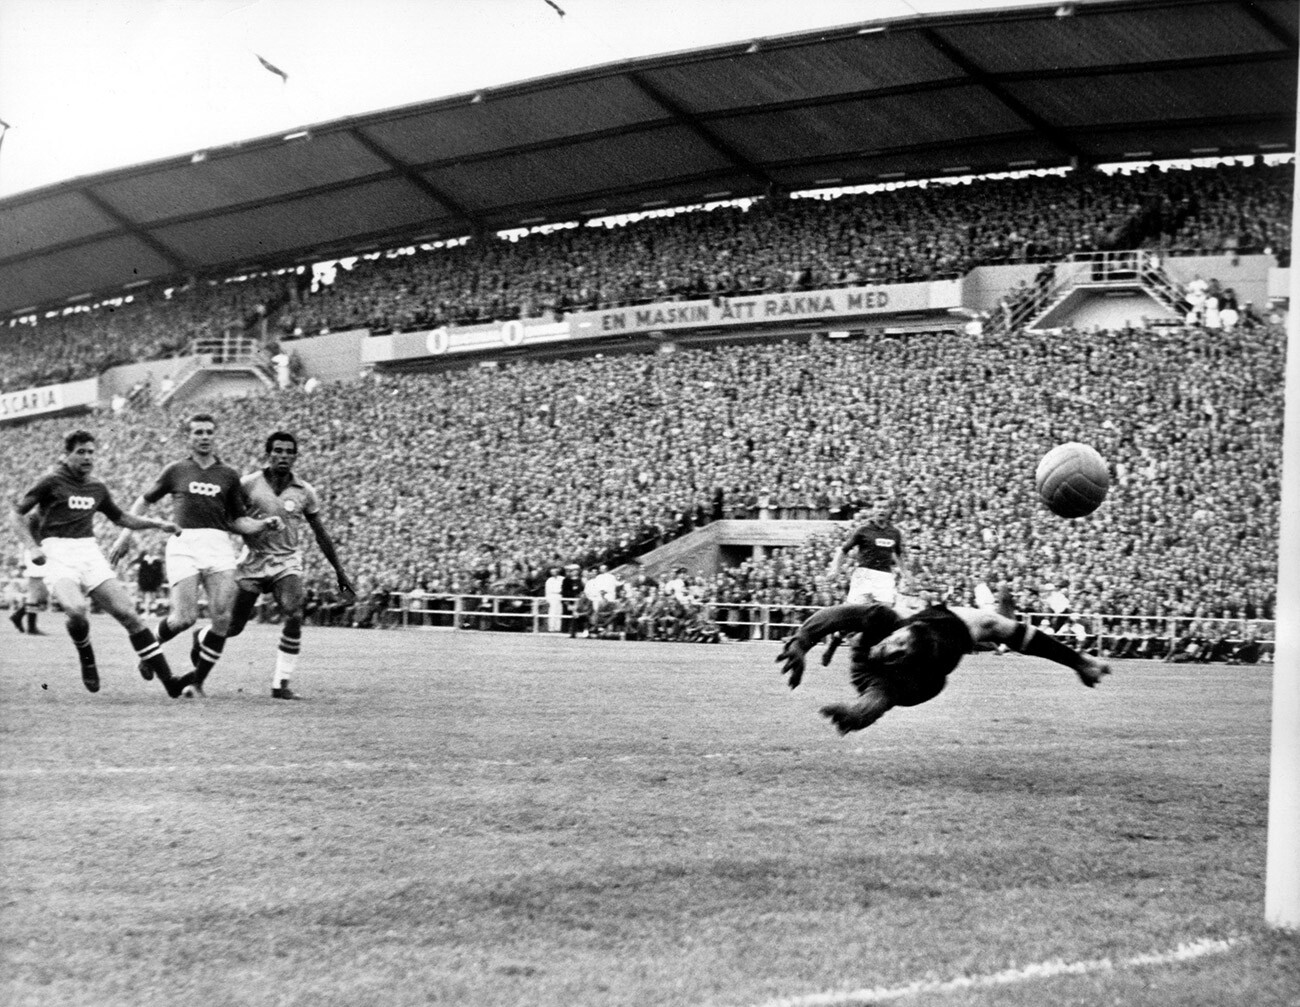 Brazilian striker Vava kicks past two opponents and scores the 1:0 lead goal during the 1958 FIFA World Cup group match against the USSR.